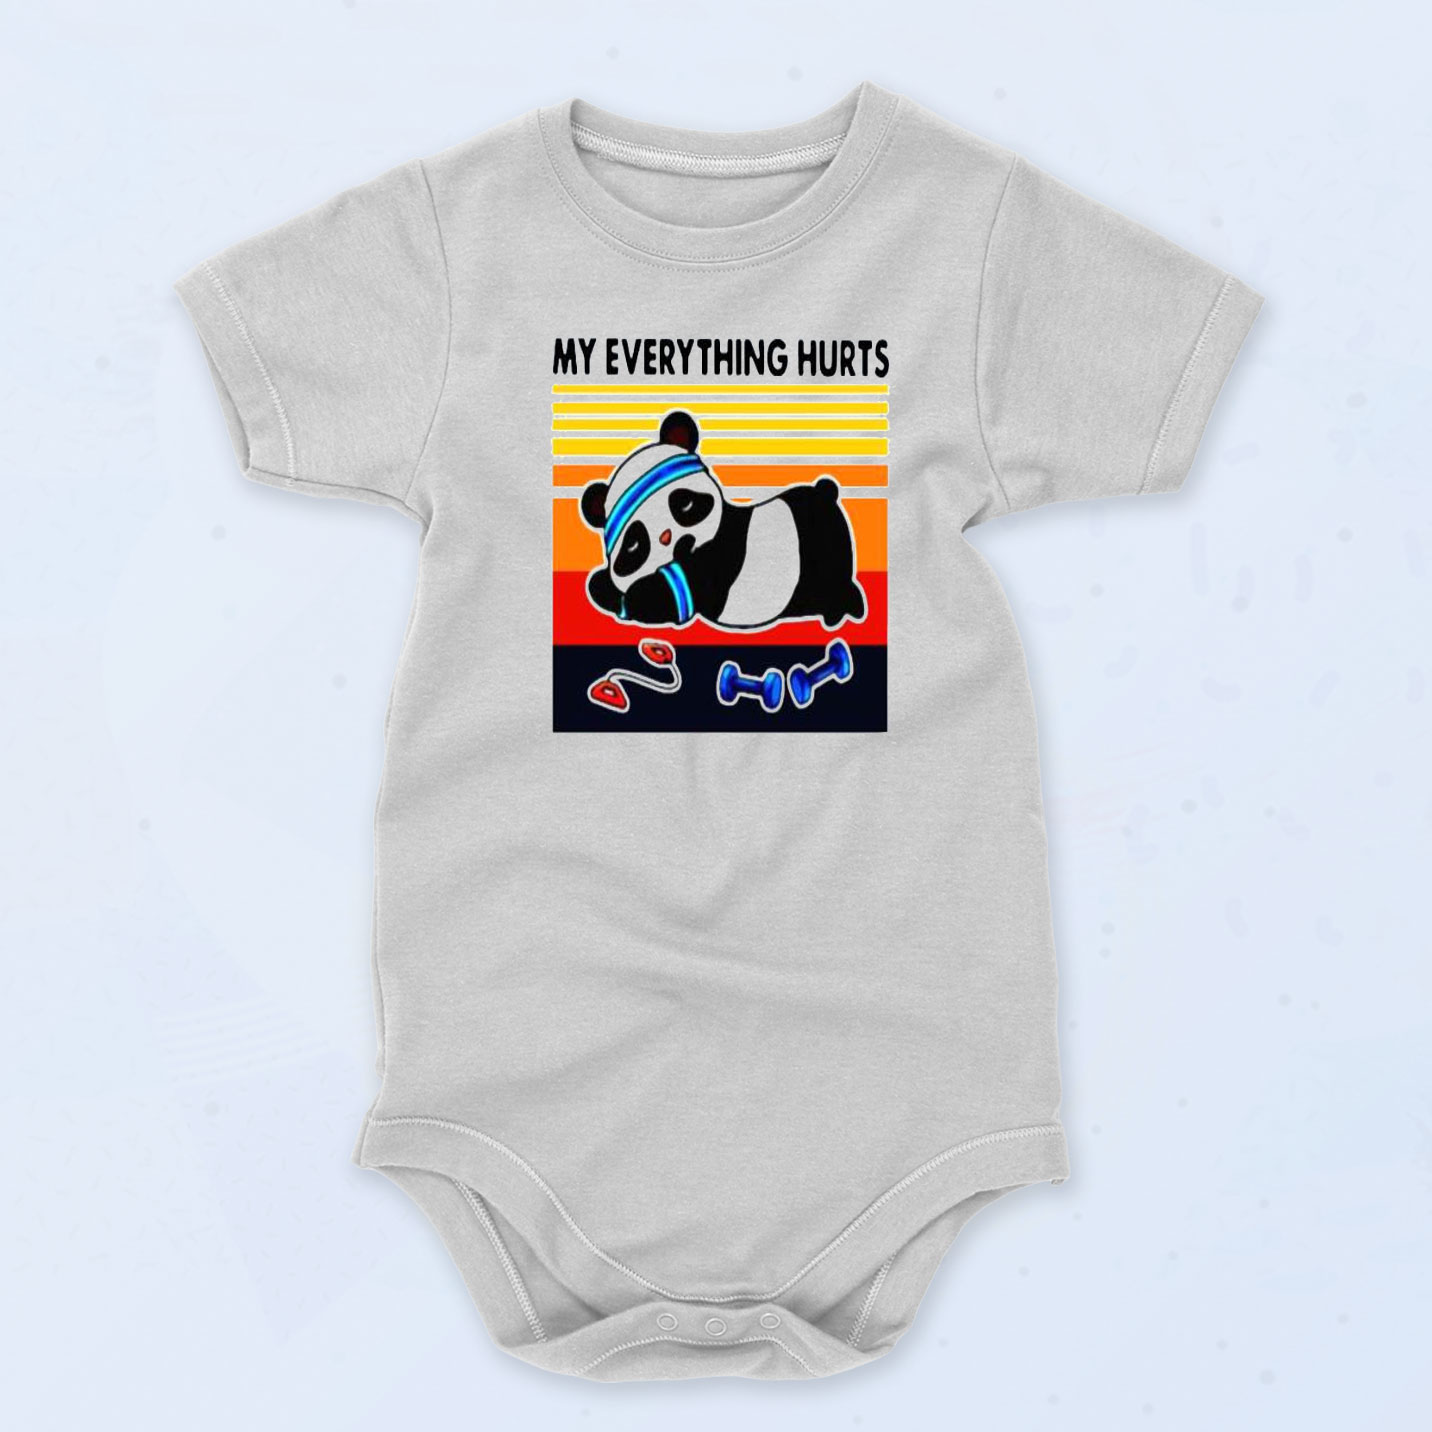 Panda Fitness My Everything Hurts Fashionable Baby Onesie, Baby Clothes ...